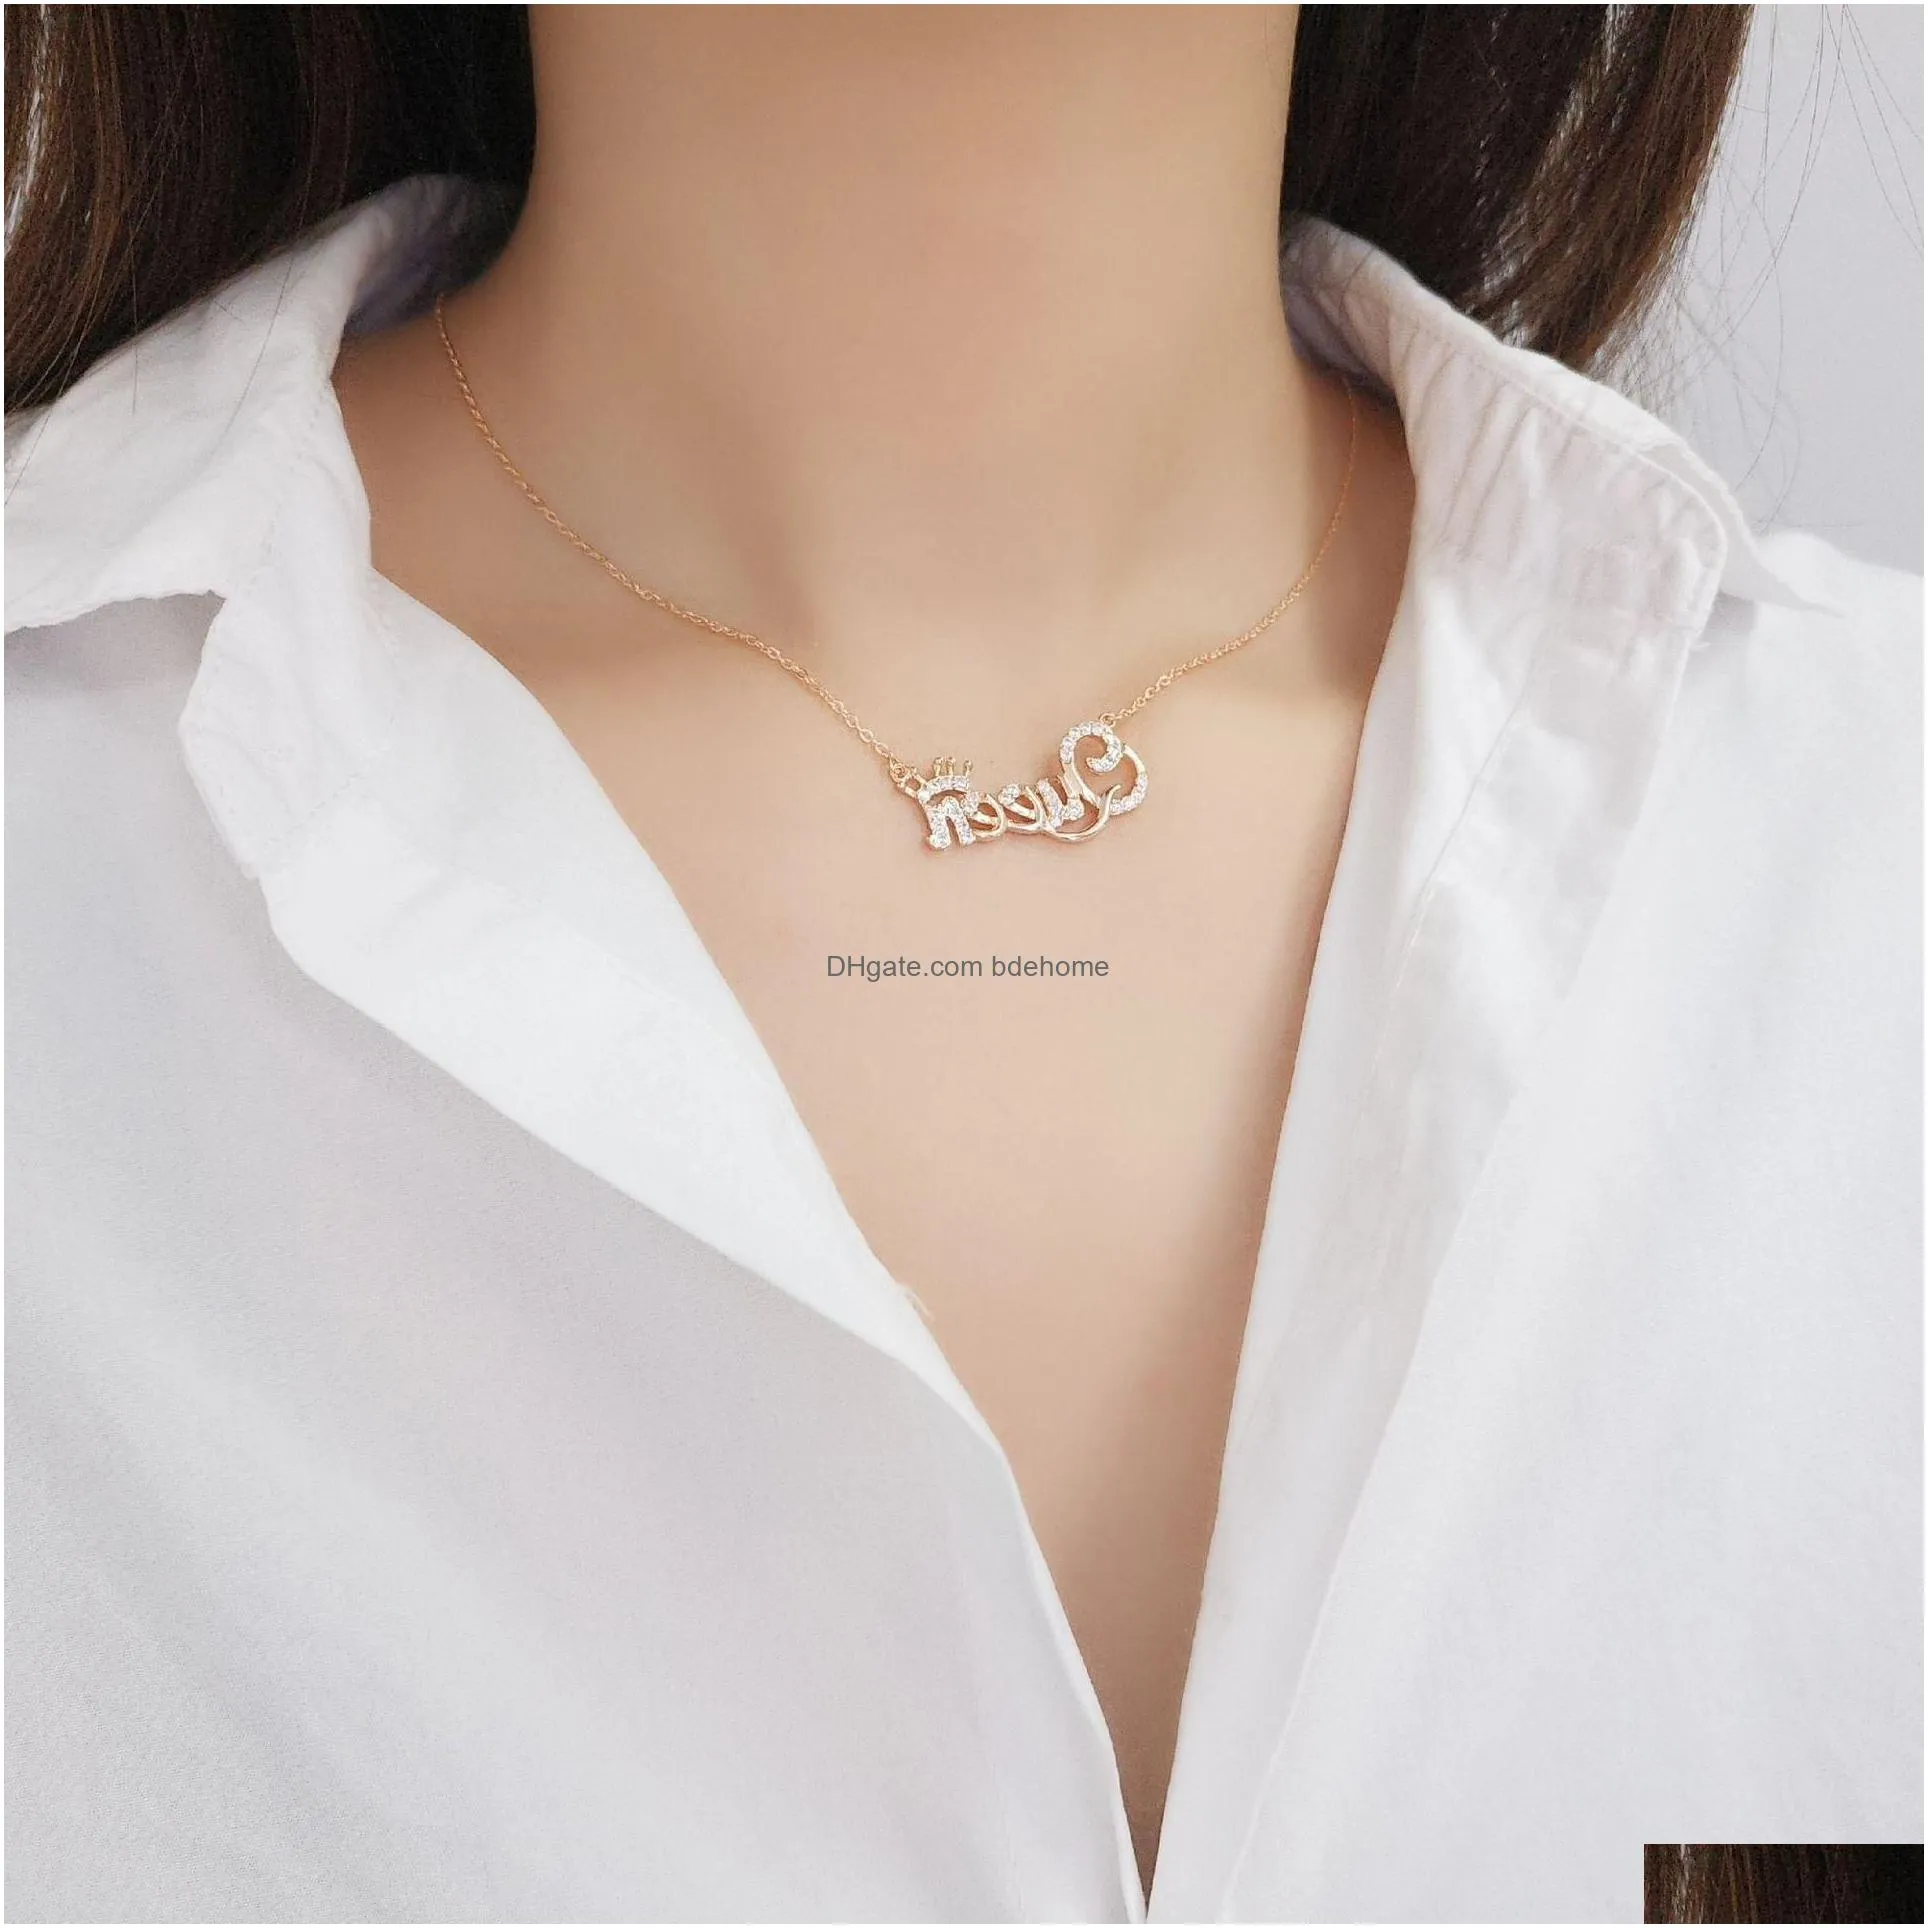 elegant letter queen pendant necklace gold silver rose gold rhinestone clavicle chain necklaces for women lady jewelry gift